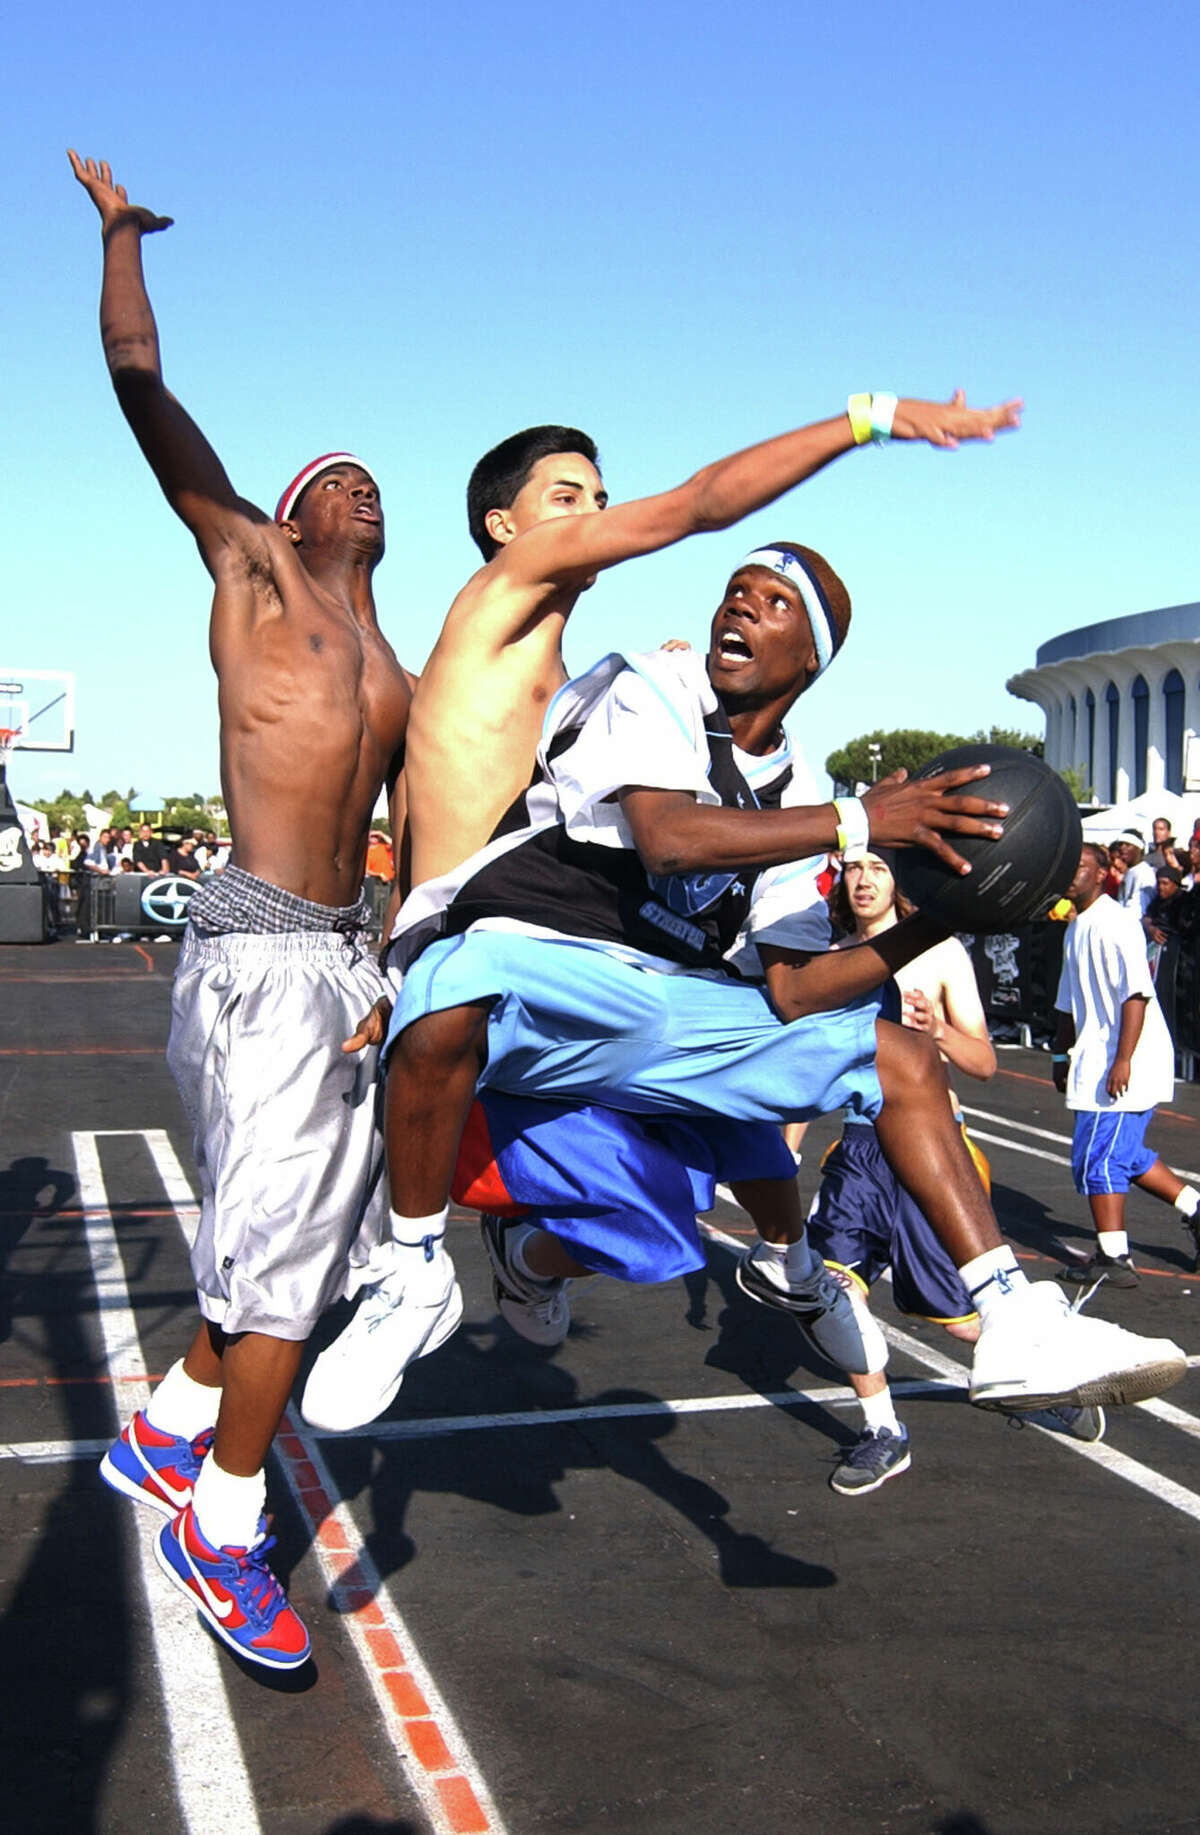 Los Angeles streetball players compete for the chance to play against the 2004 AND1 team on the asphalt of the Great Western Forum in Inglewood, California on June 9, 2004.